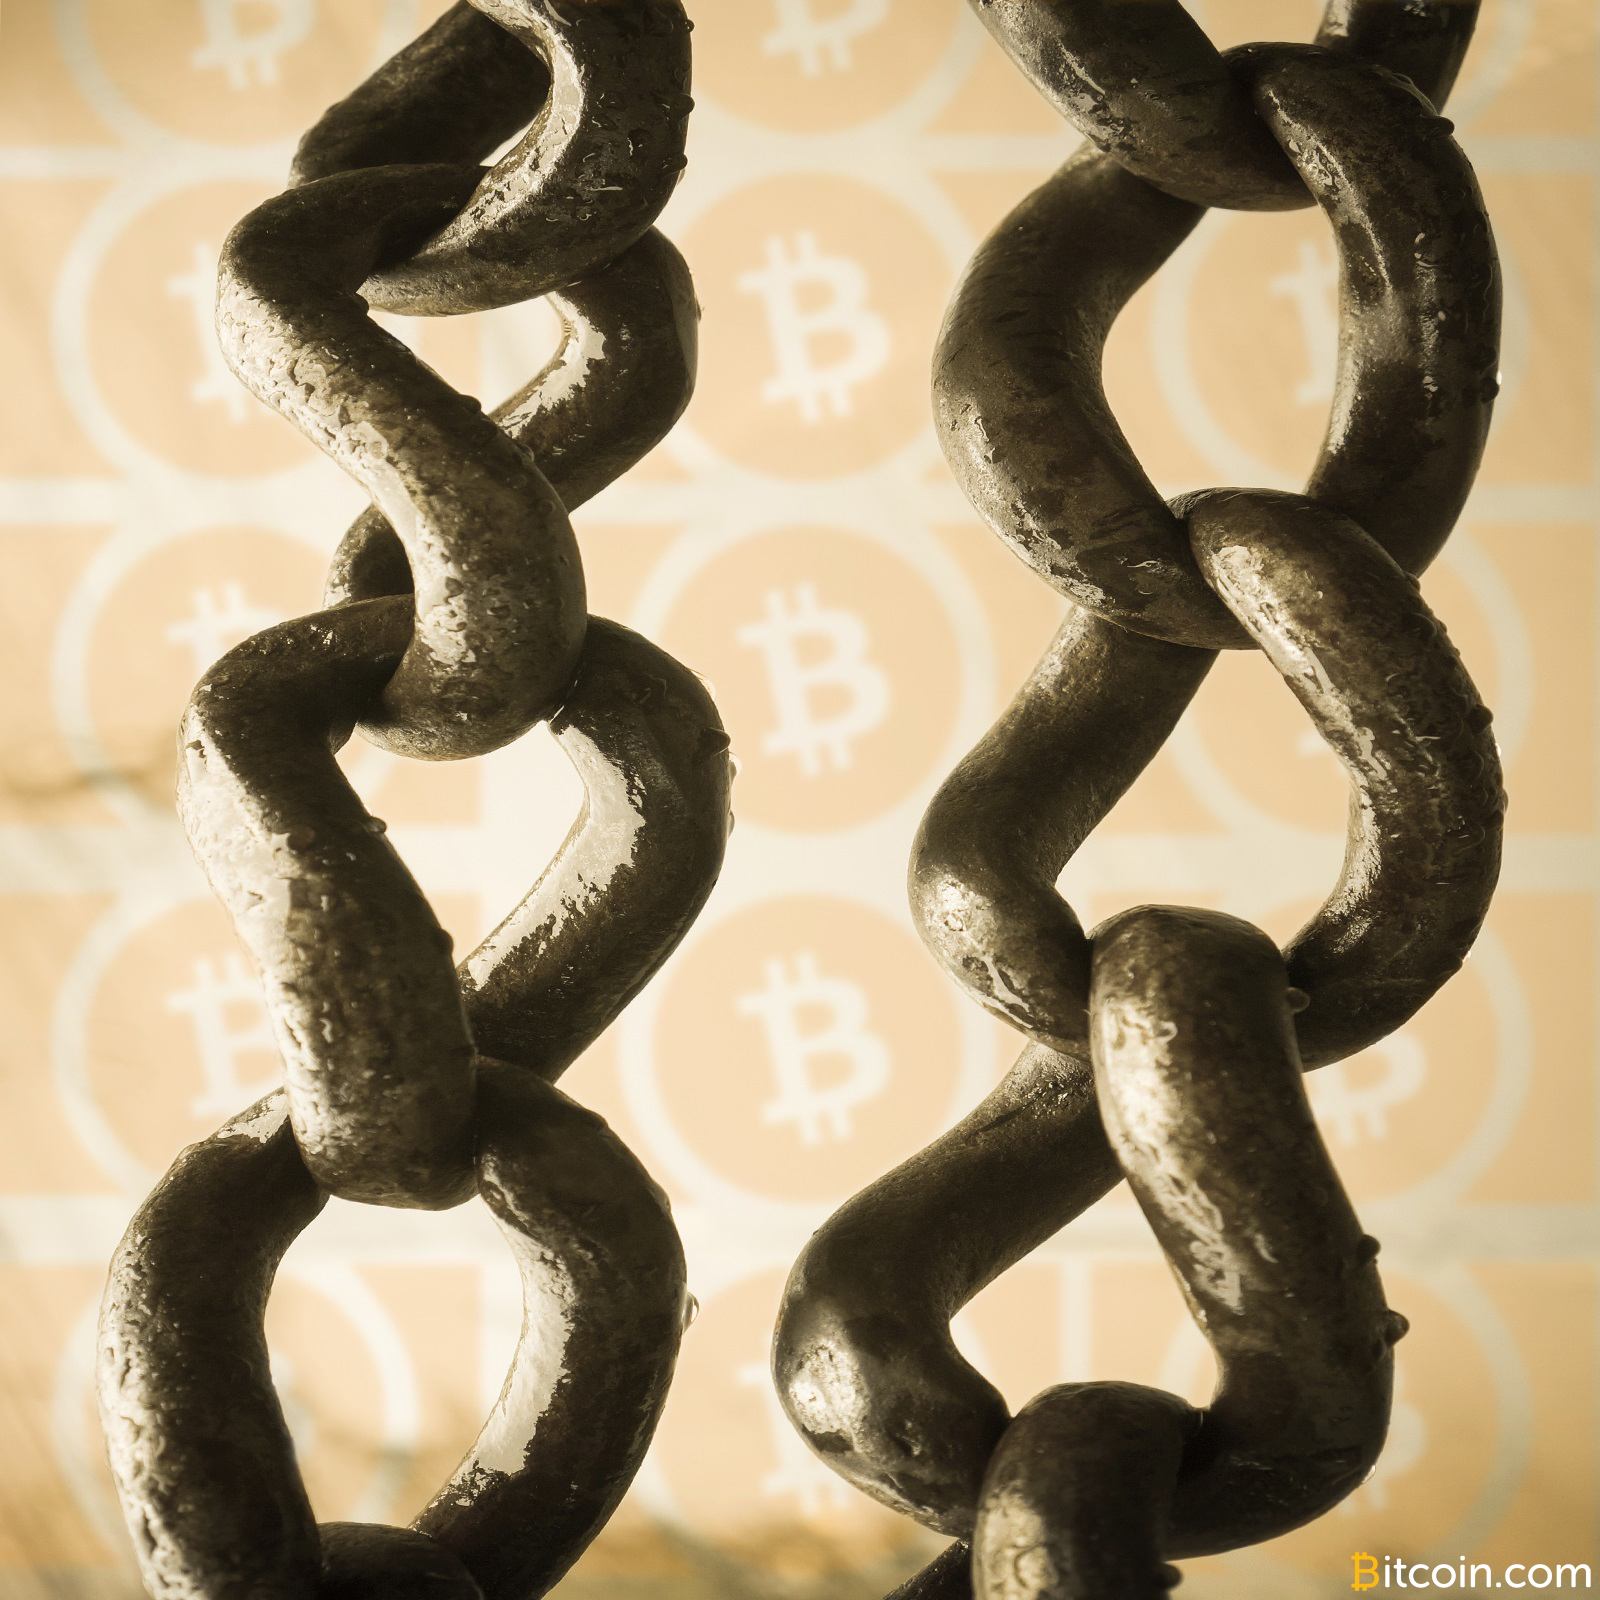 Bitcoin Cash Becomes the Longest Chain As Miners Toggle Between Profits